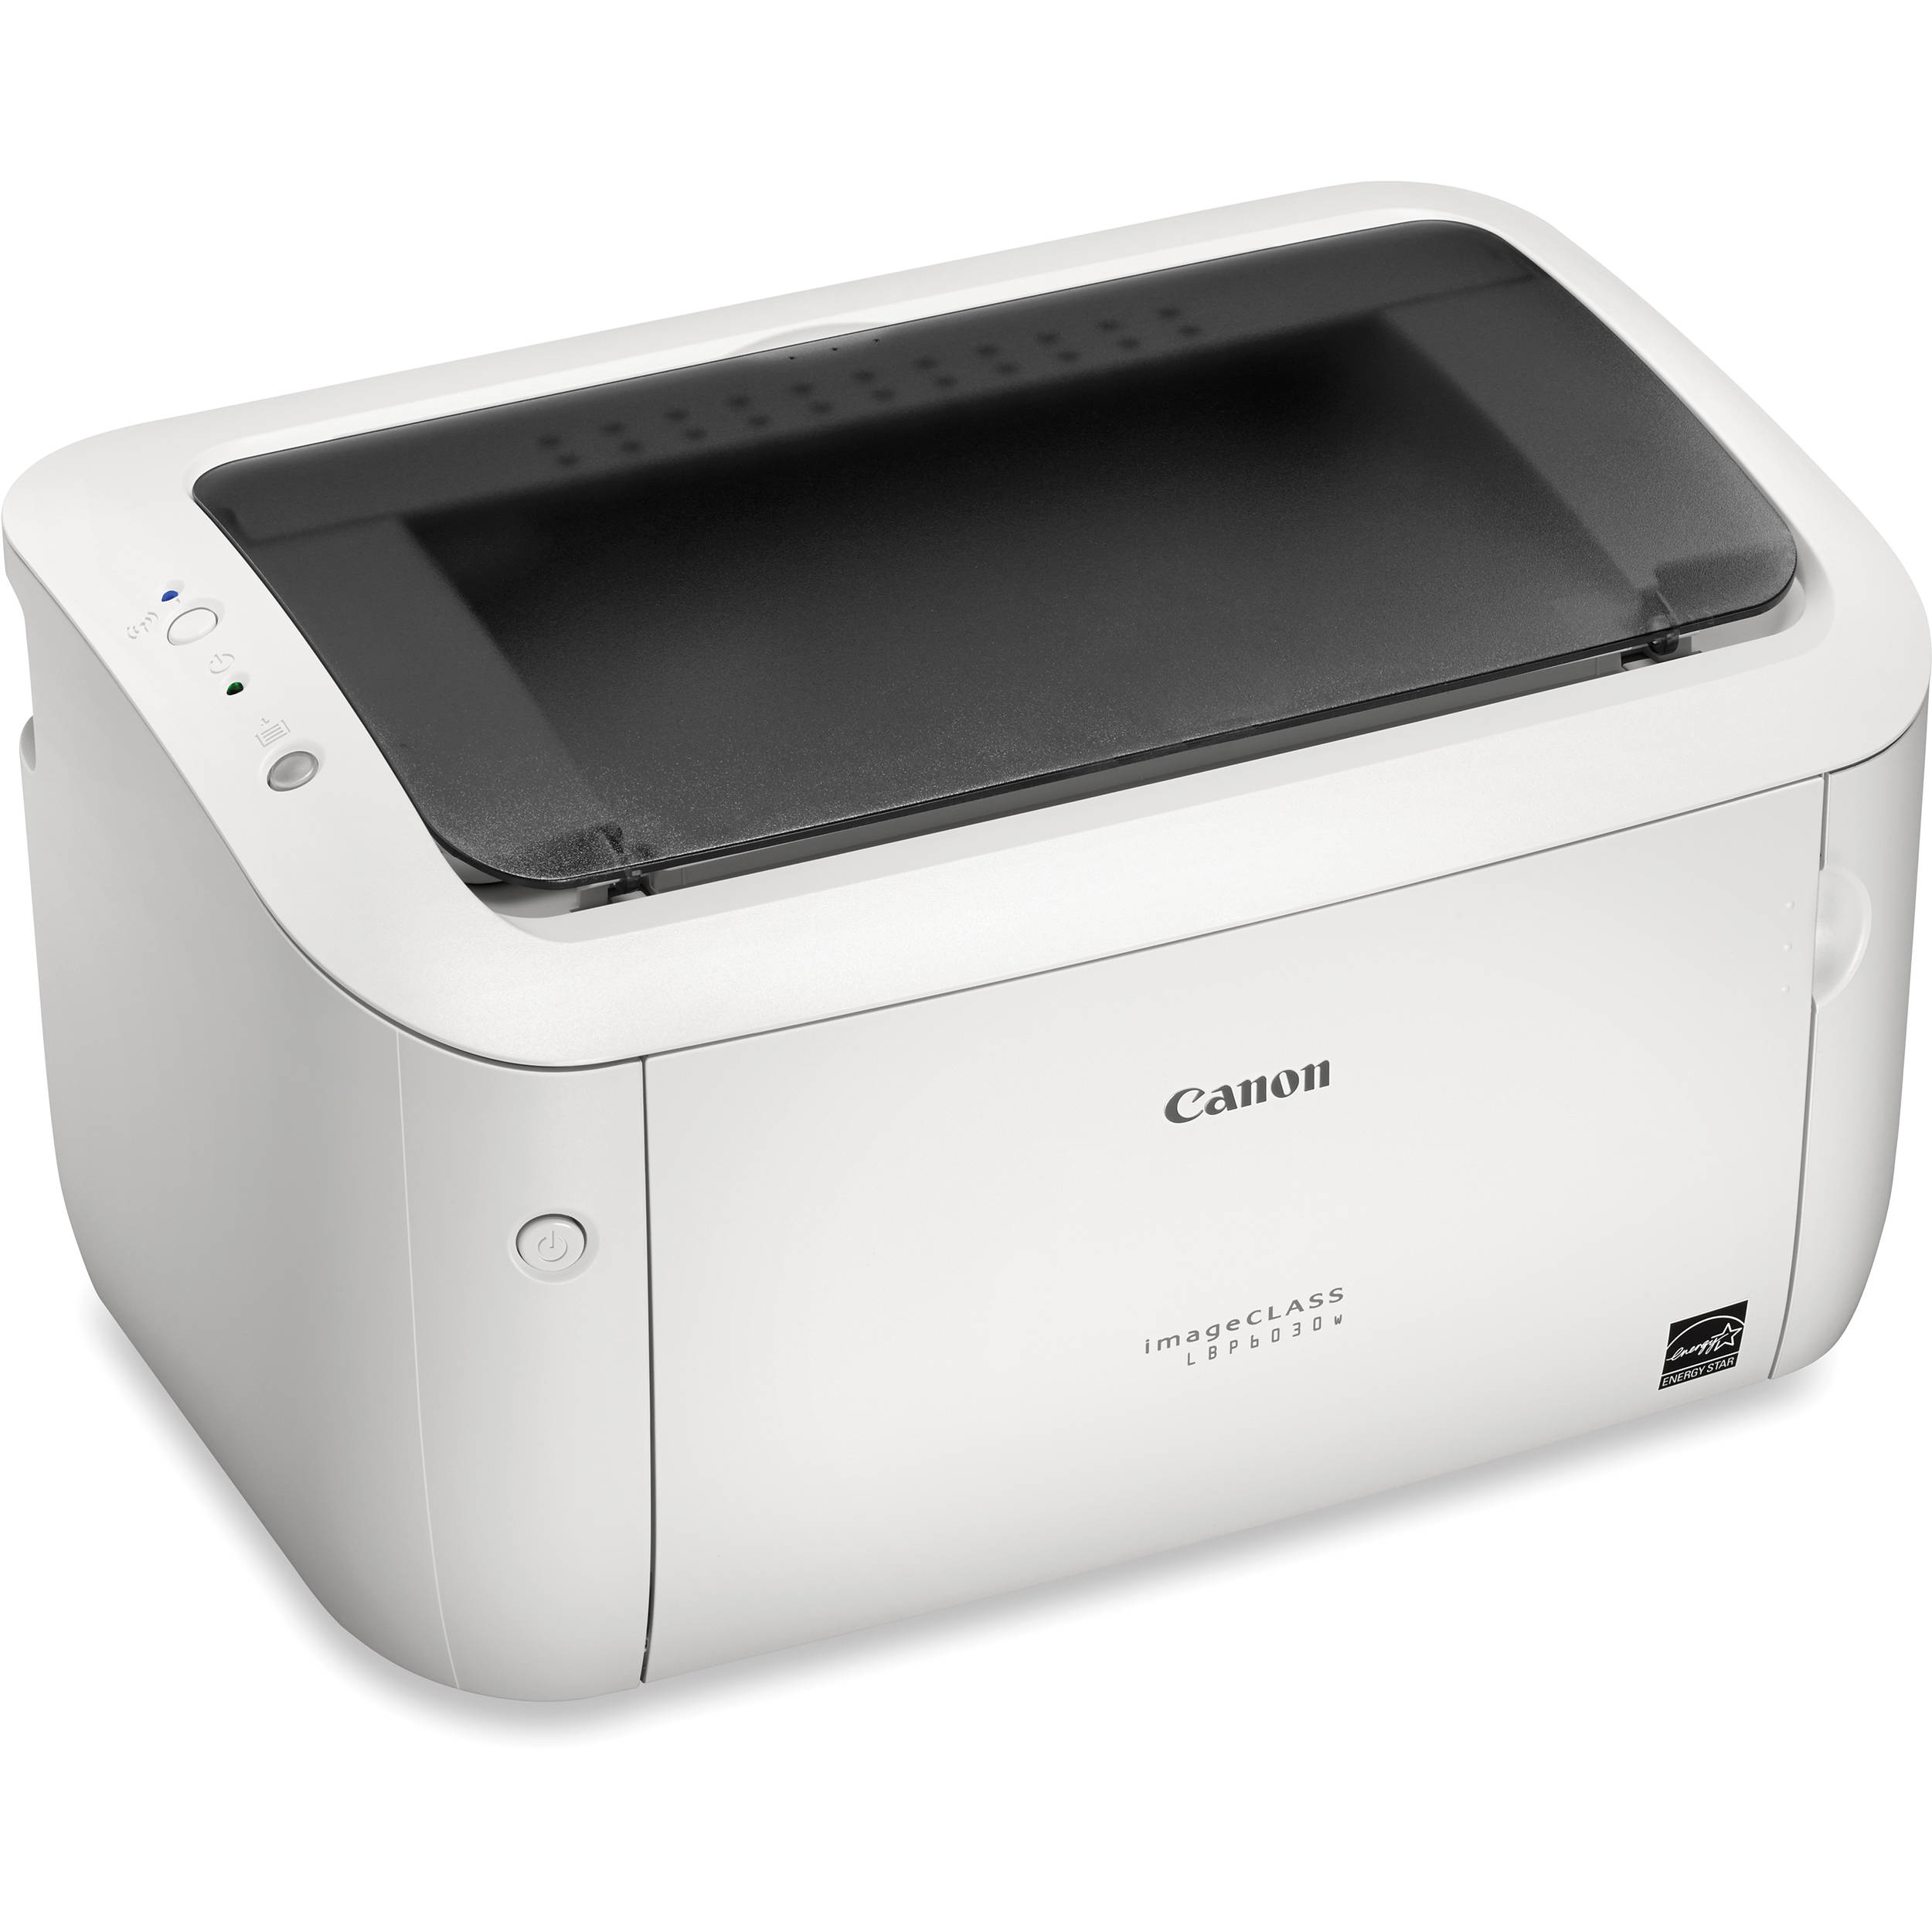 Canon Laser Printer Drivers For Os X